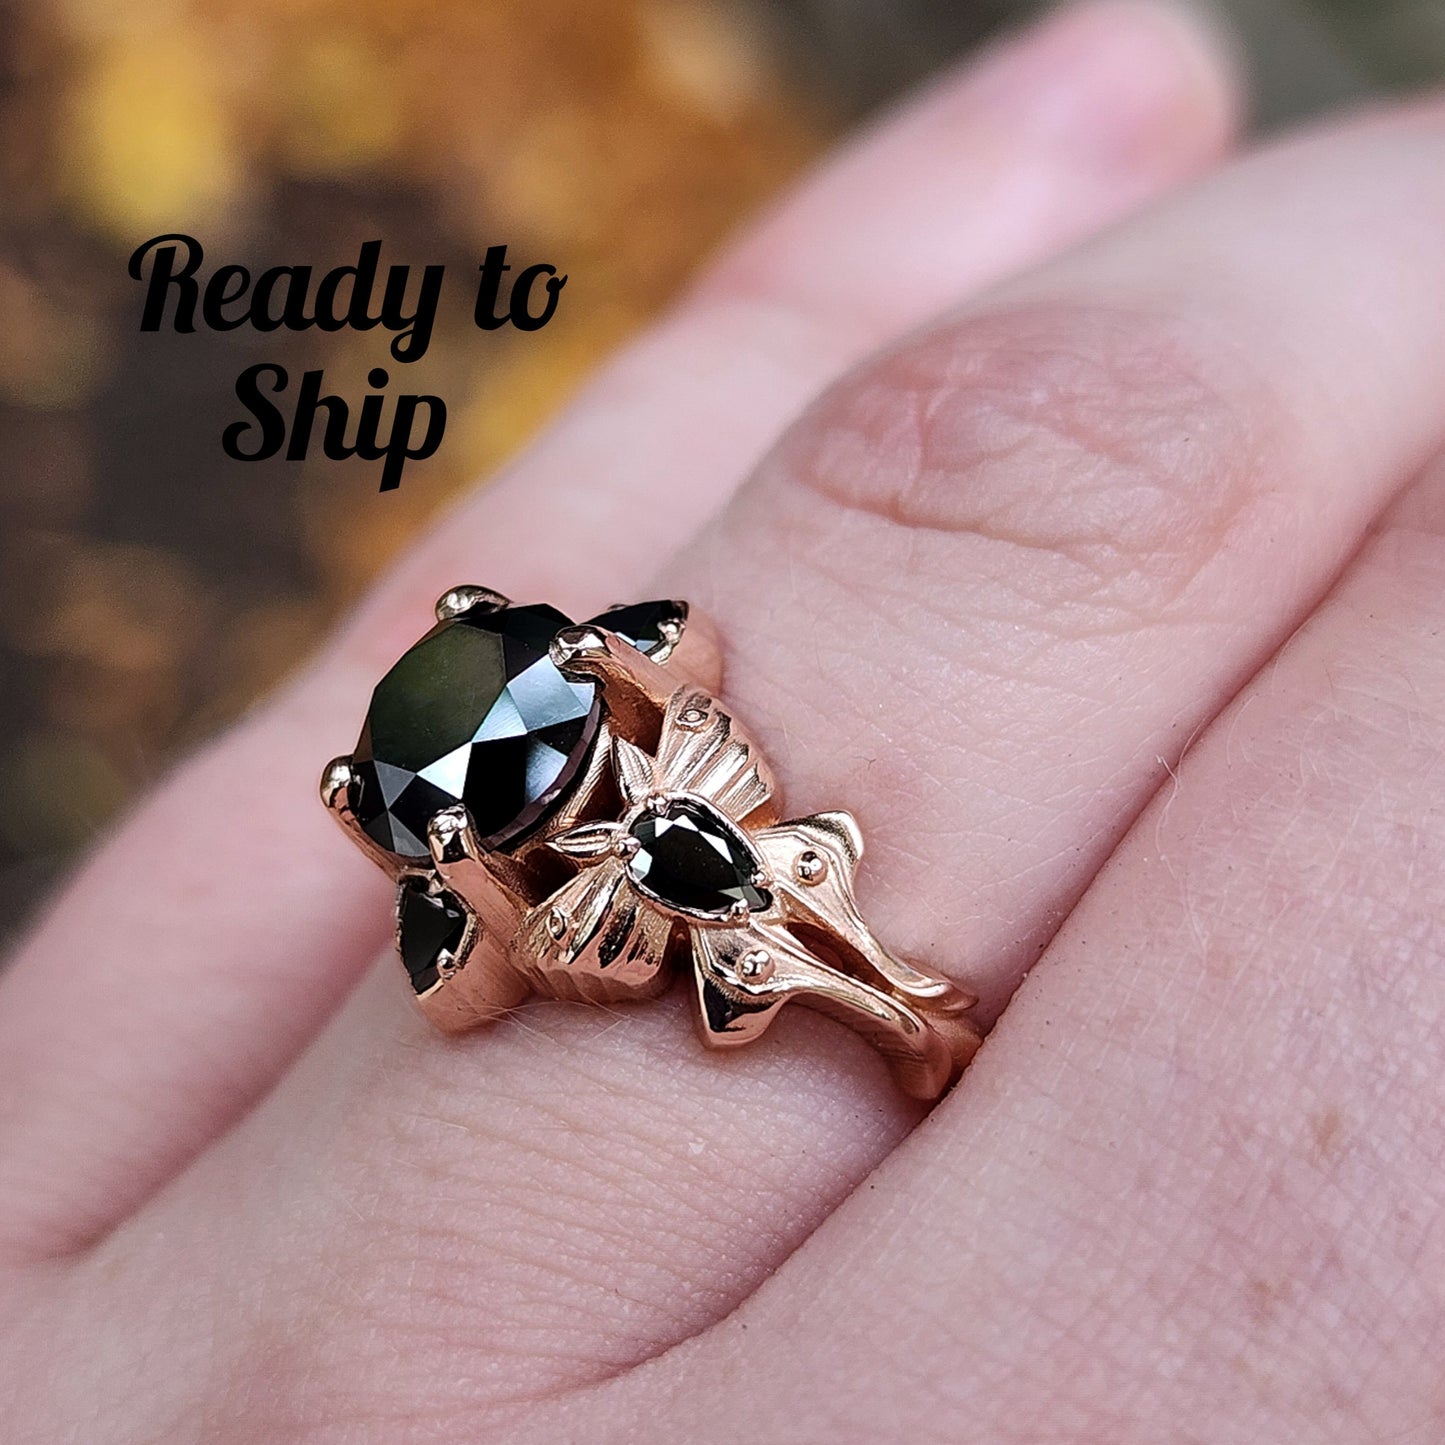 Luna Goth Moth Engagement Ring with Black Diamonds - Bug Wedding Ring Nature Inspired Fine Jewelry 14k Rose Gold Ready to Ship Size 6-8